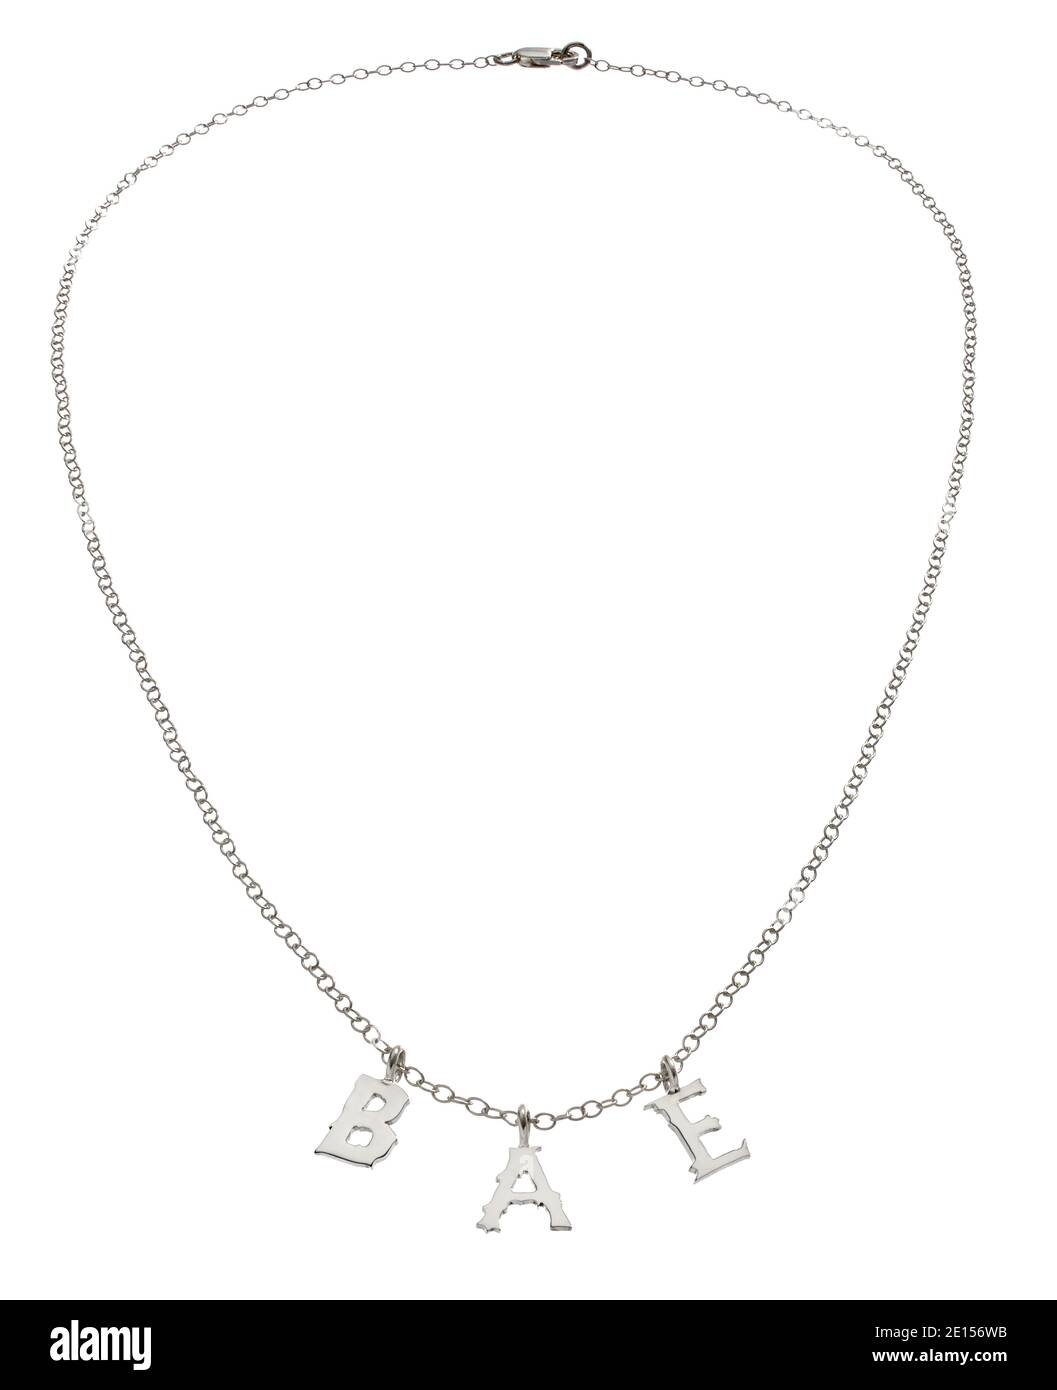 Silver necklace by Wendy Brandes photographed on a white background Stock Photo